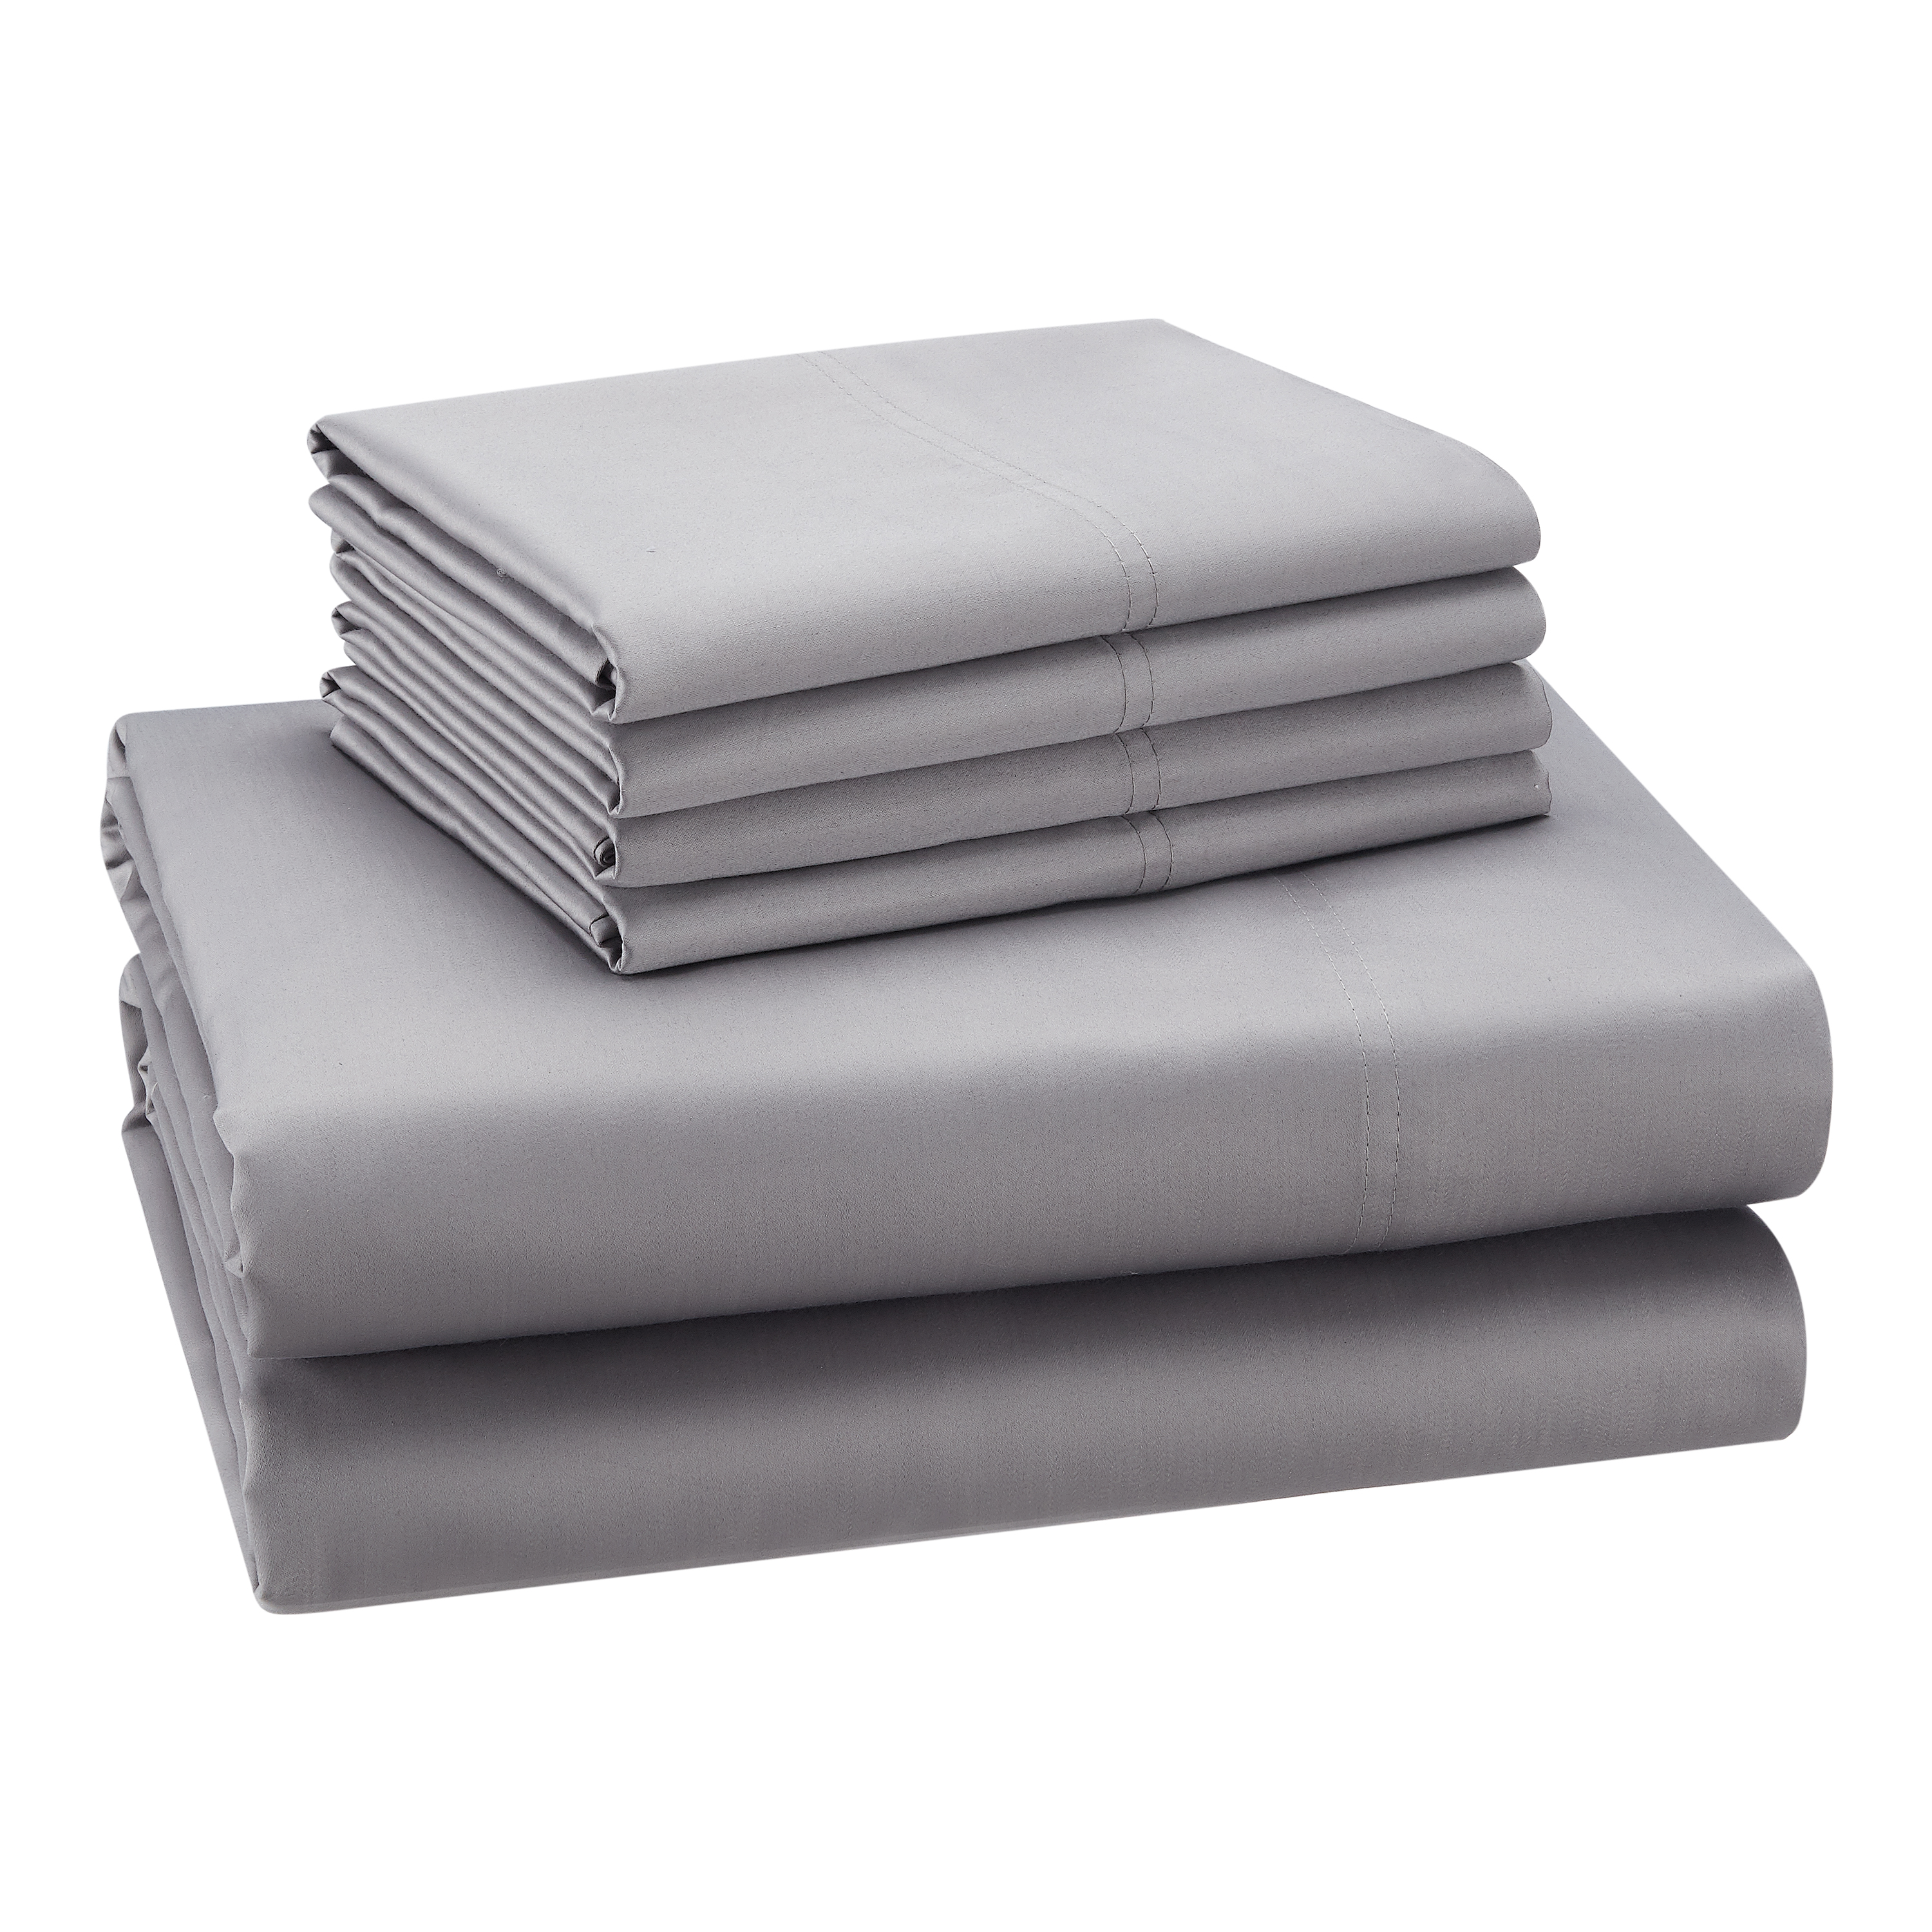 Hotel Style 1200 Thread Count Cotton Rich 6-Piece Sheet Set, Soft Silver Color, King - image 1 of 7